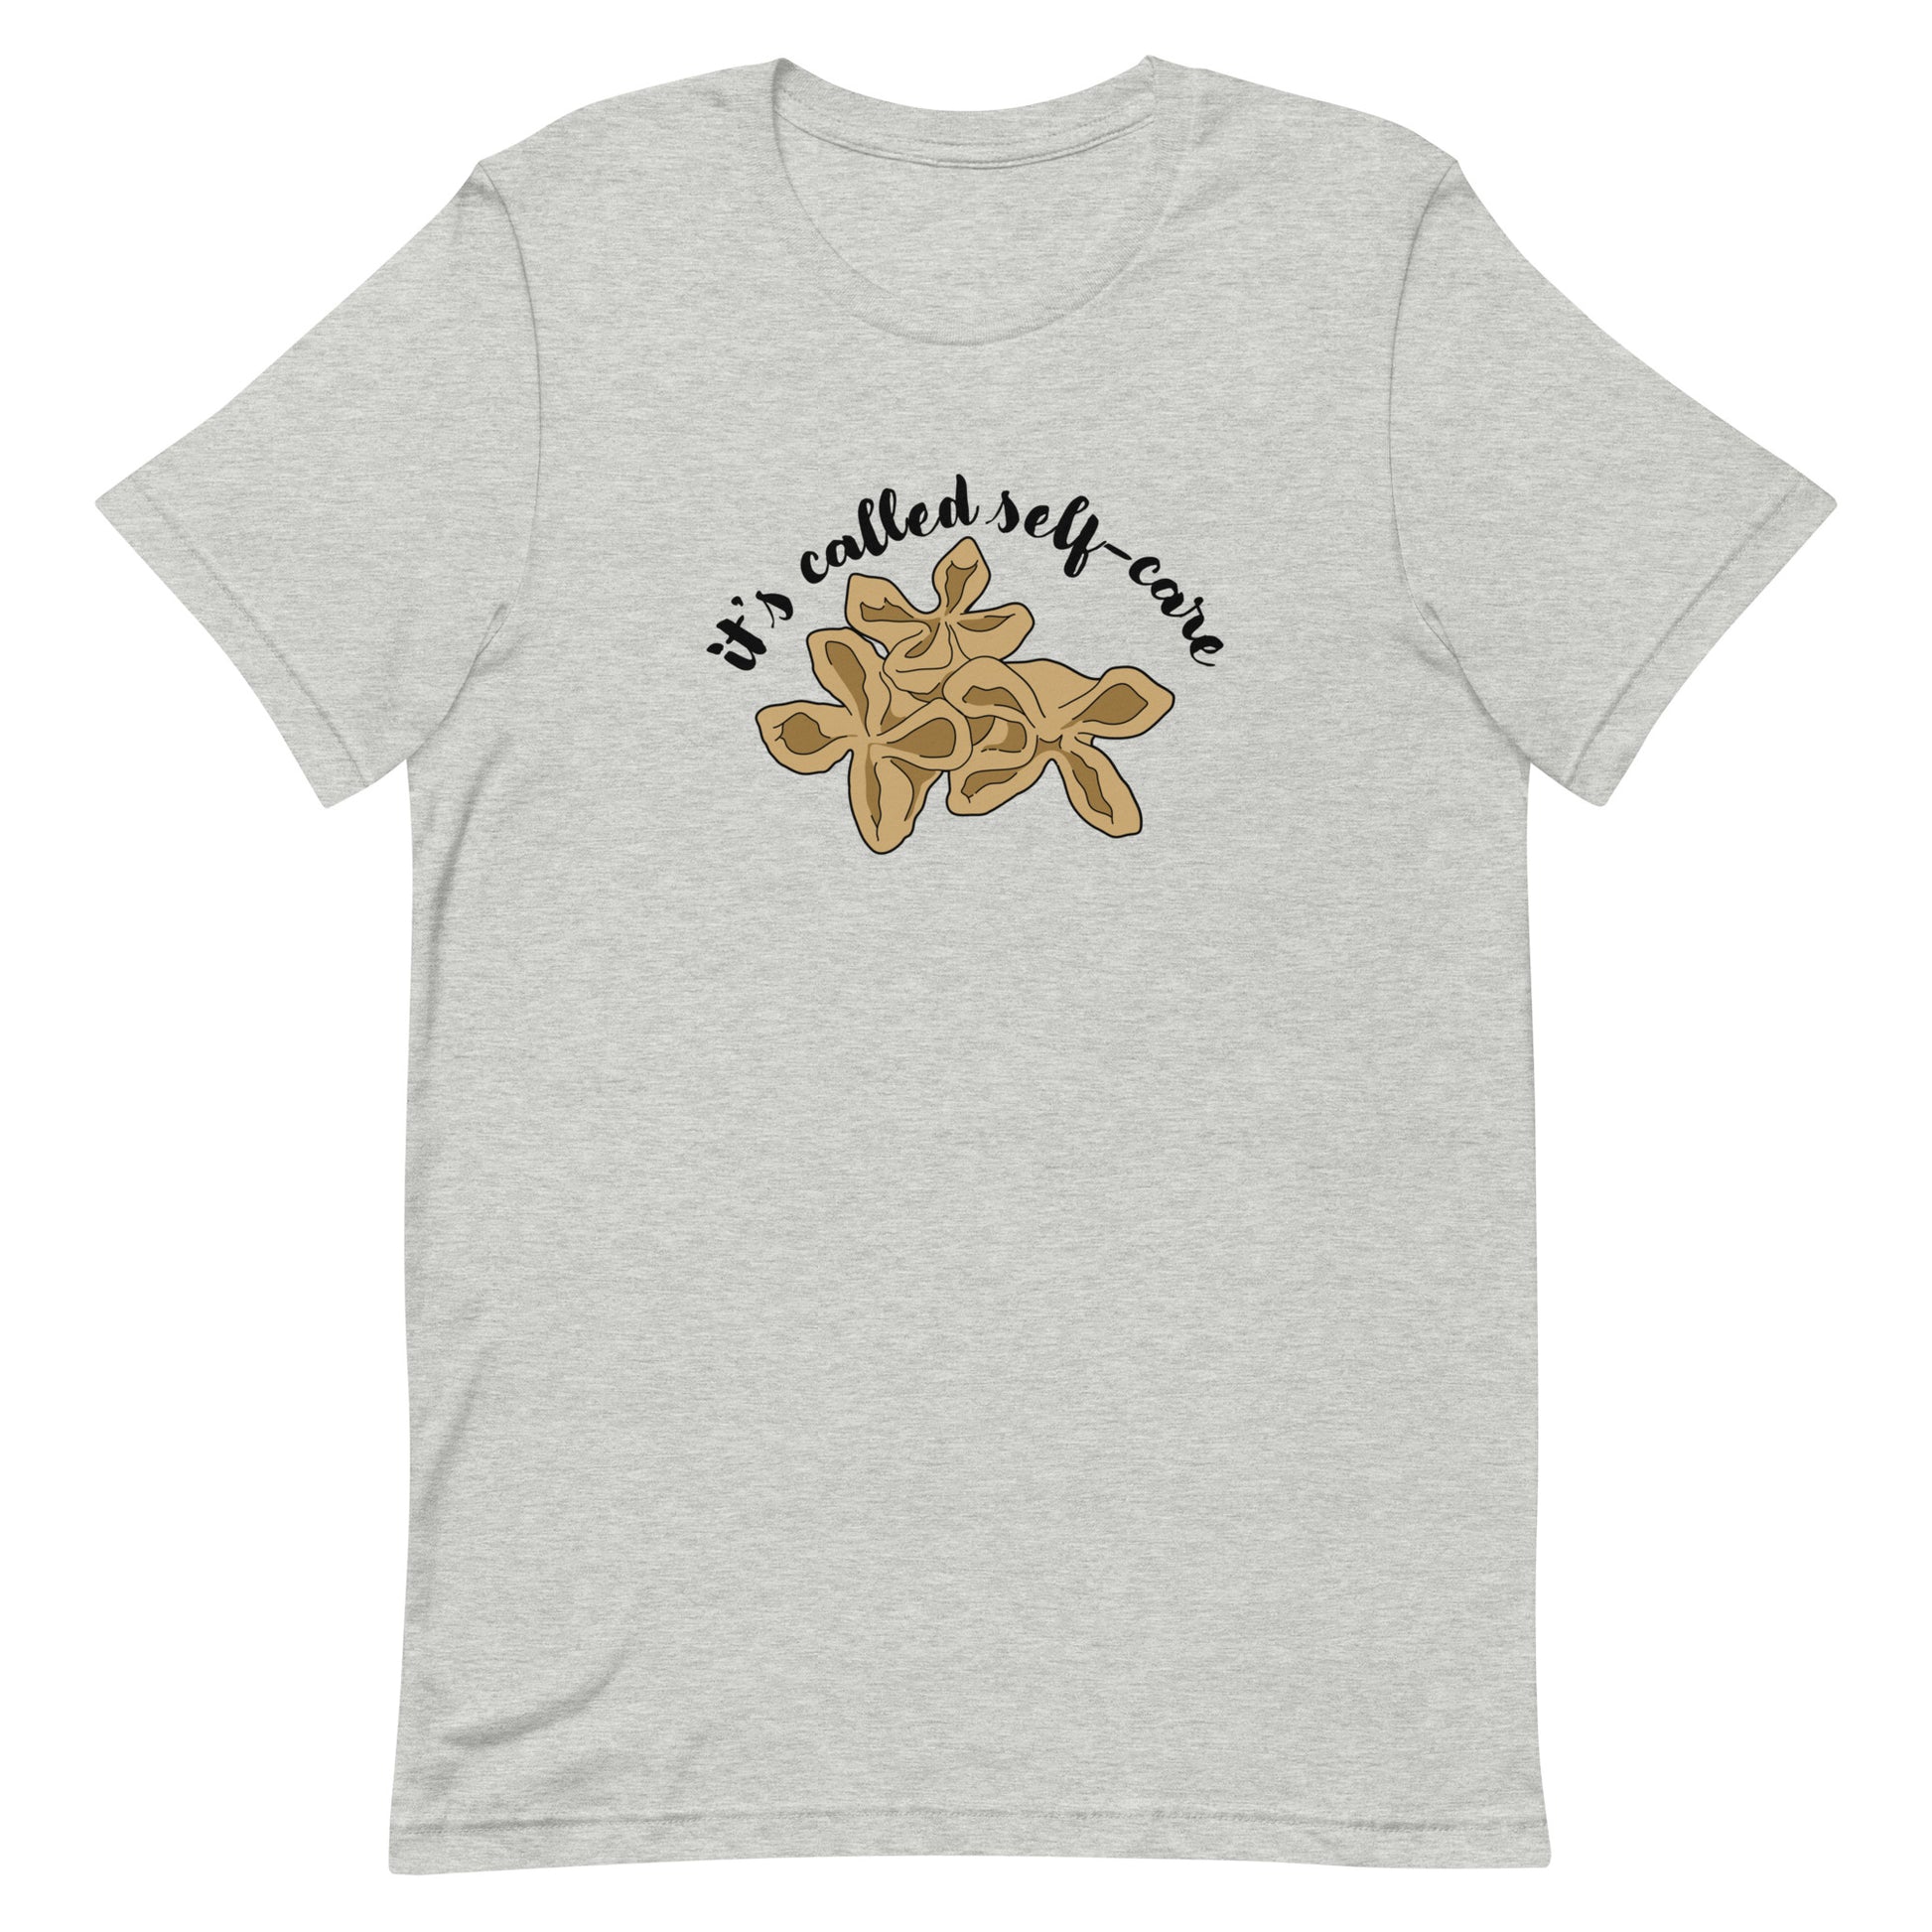 A gray crewneck t-shirt featuring an illustration of three pieces of crab rangoon. Text in an arc above the crab rangoon reads "it's called self-care" in a cursive script.